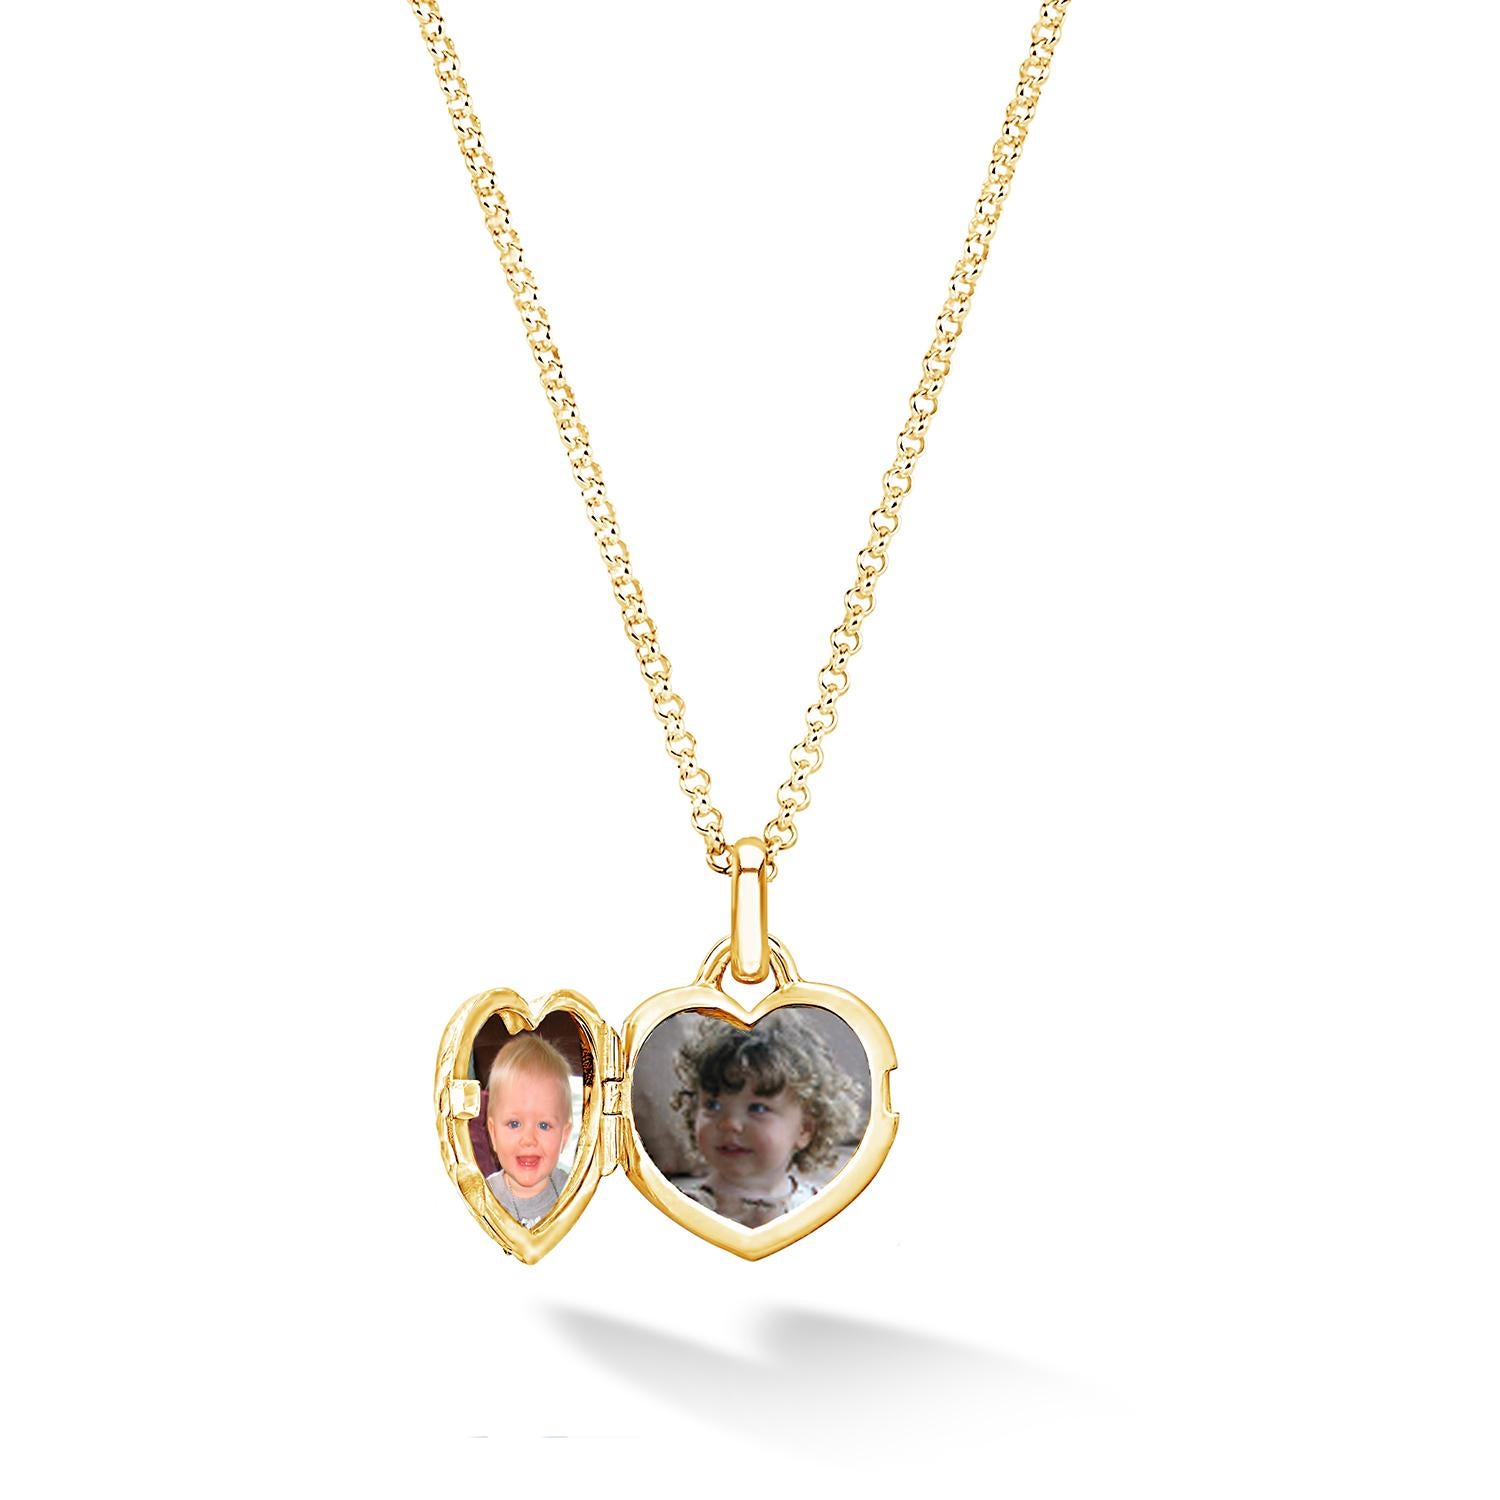 Handcrafted in our London studio, this sterling silver small heart Lumiere locket has an 18ct yellow gold vermeil finish and is set with a modern, geometric line of sparkling white sapphires. Featuring our signature hammered texture, the locket is